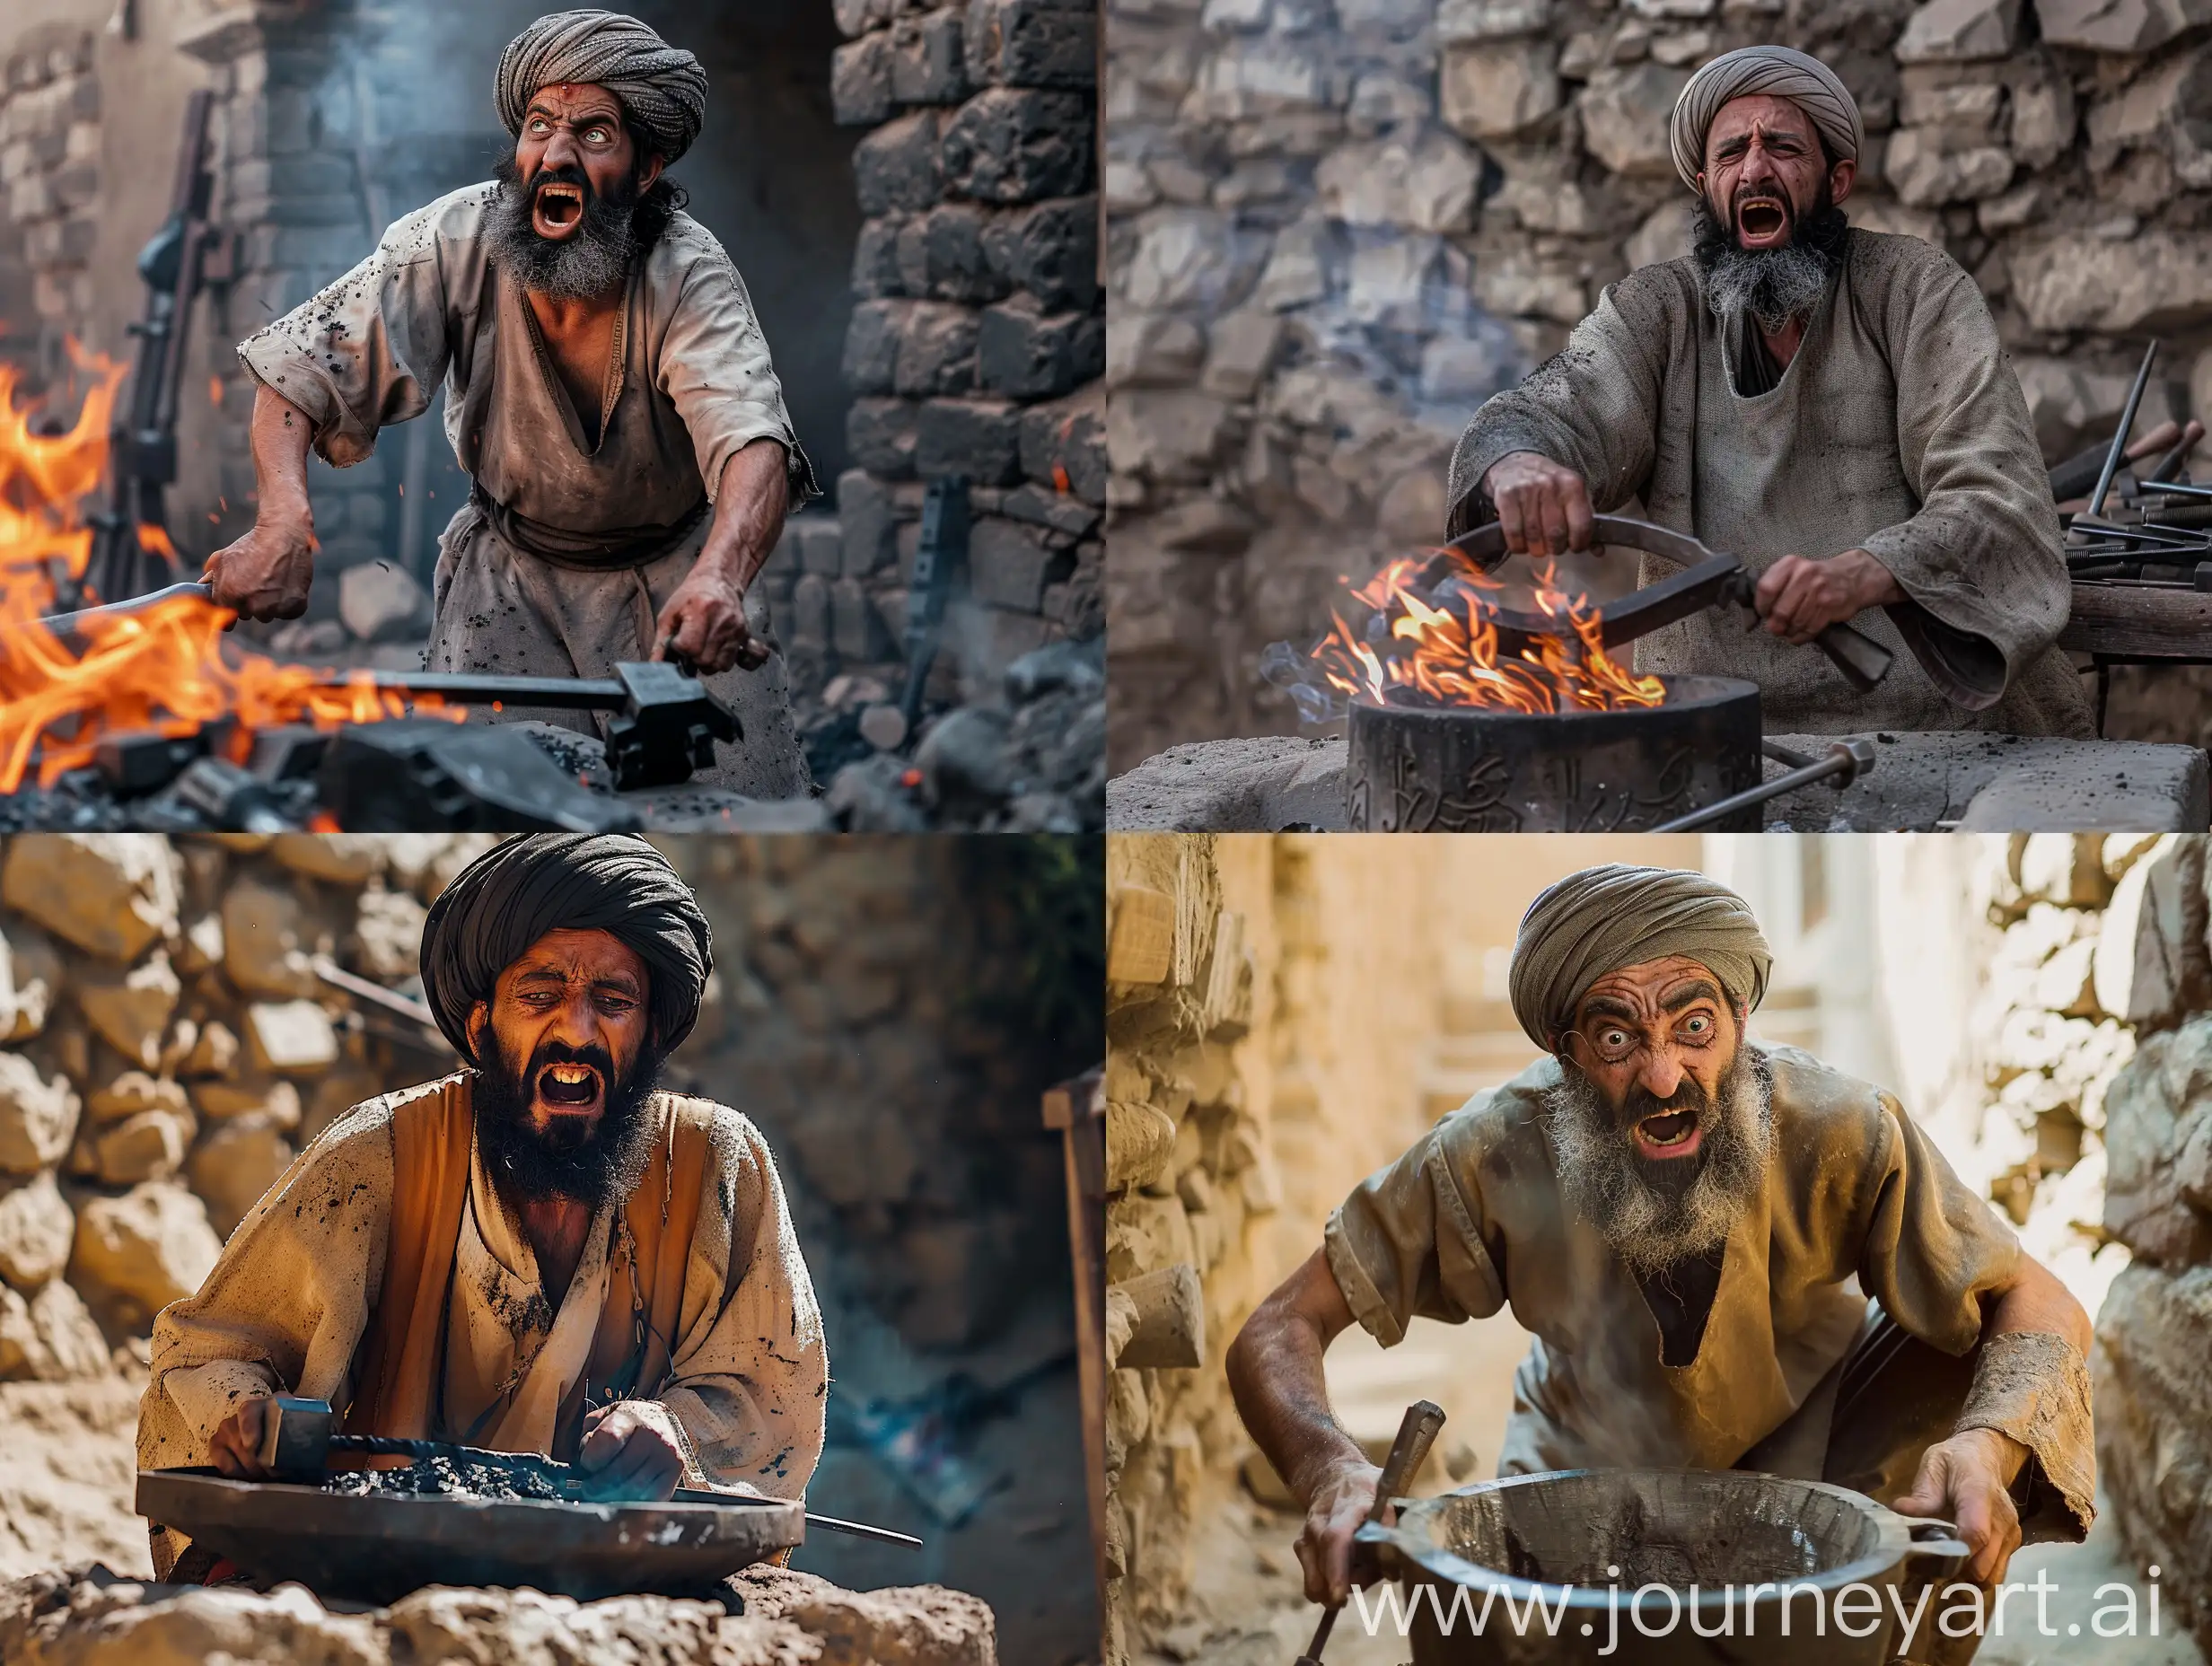 A Persian blacksmith in ancient Iran is scared and is about to fall into blacksmithing. Make a realistic photo